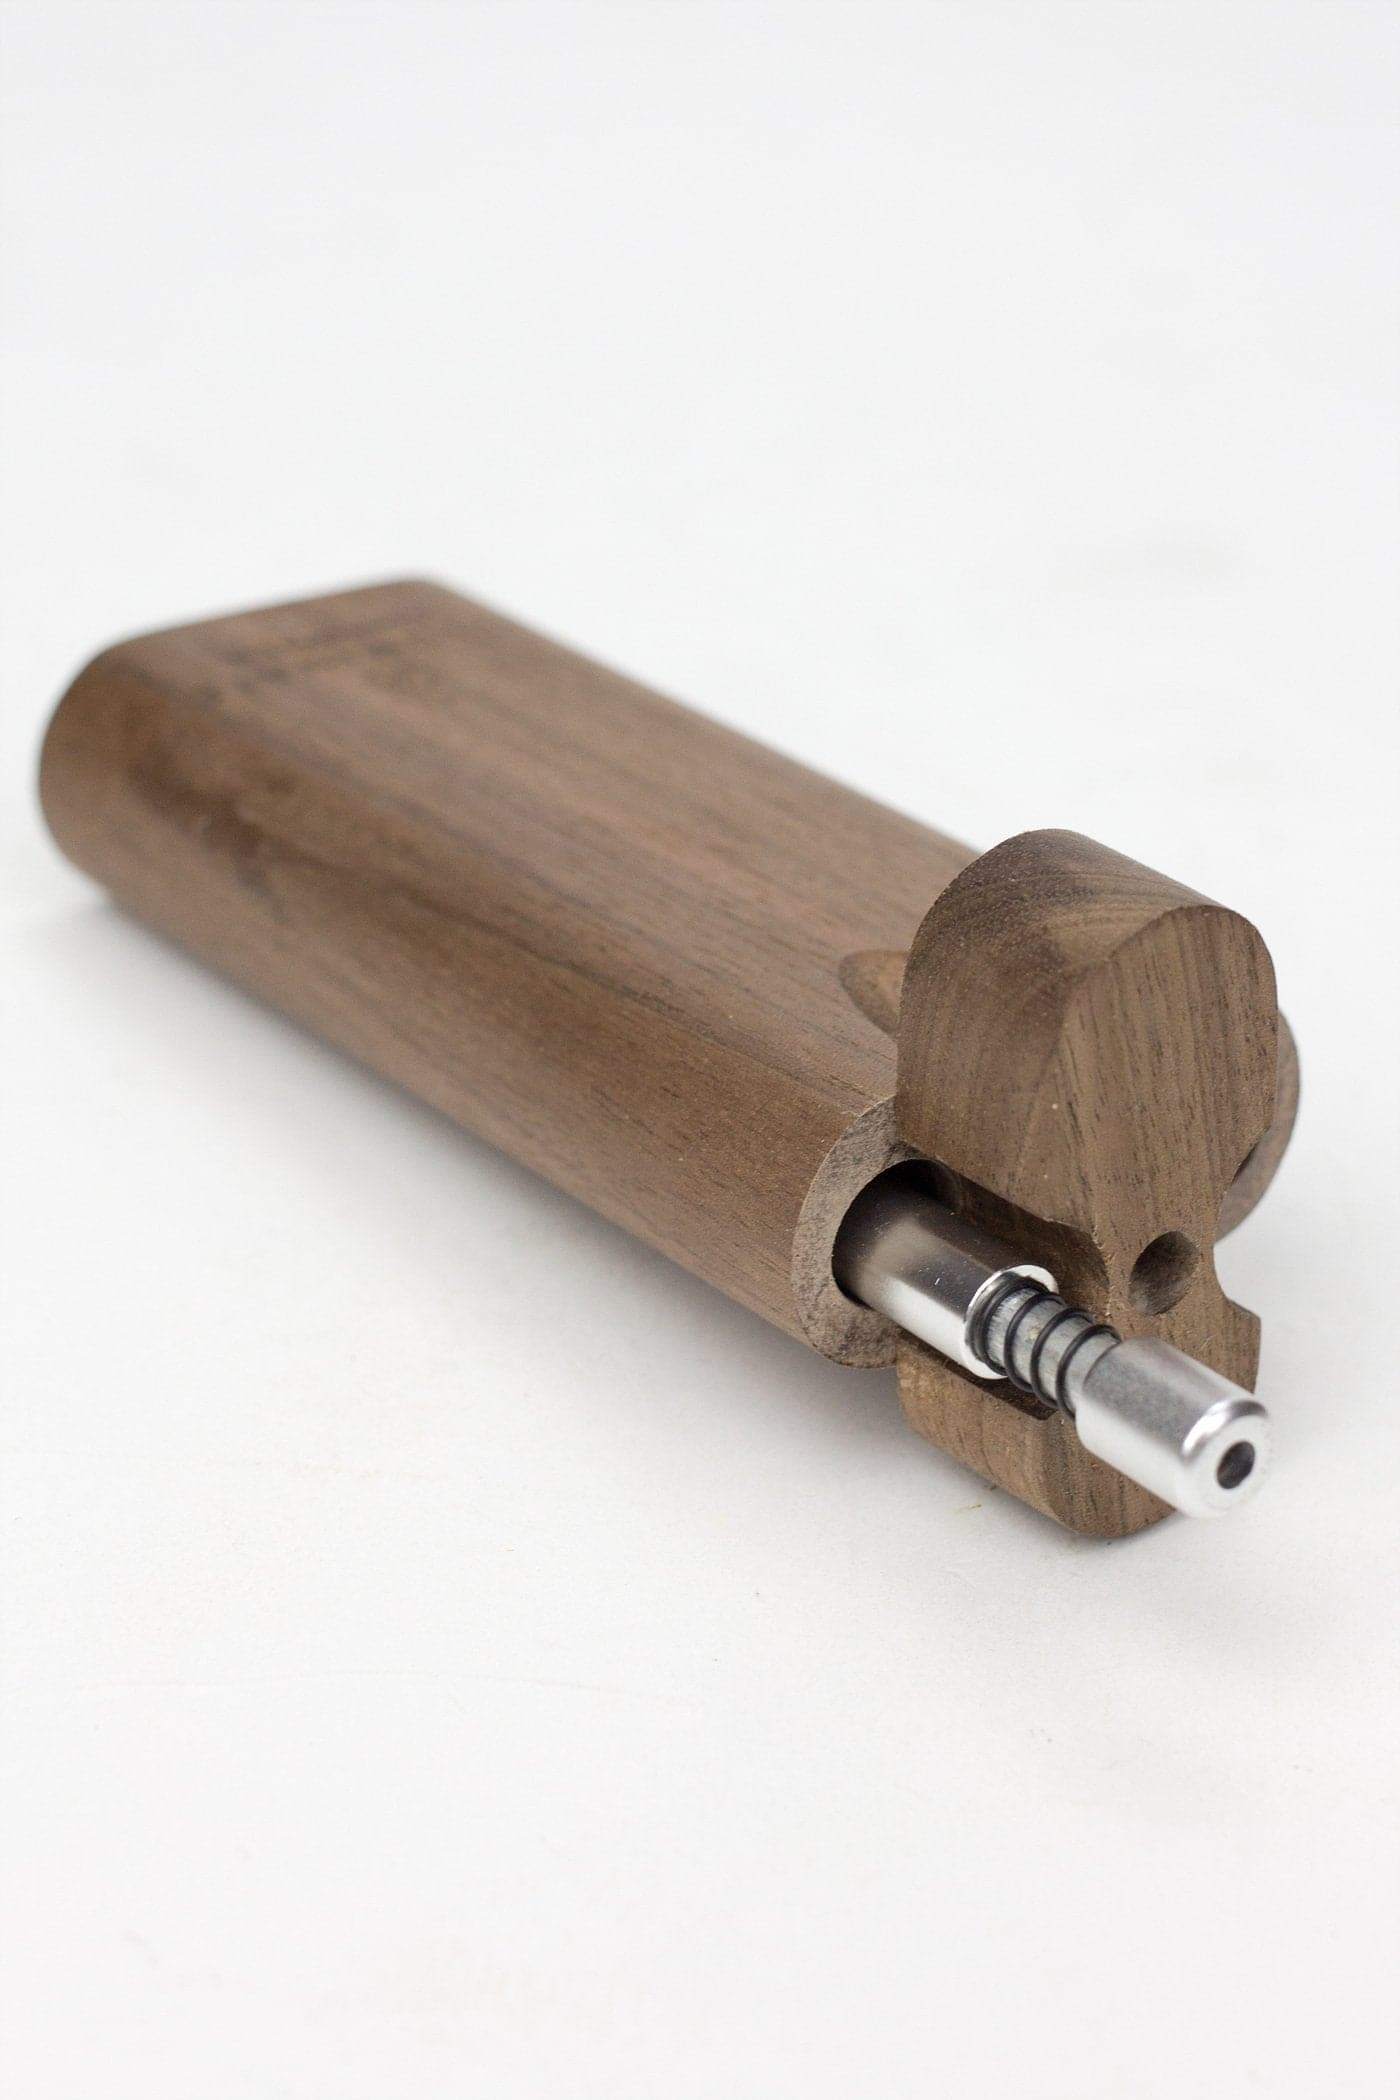 Walnut Dugout with Anodized Spring One hitter box of 10